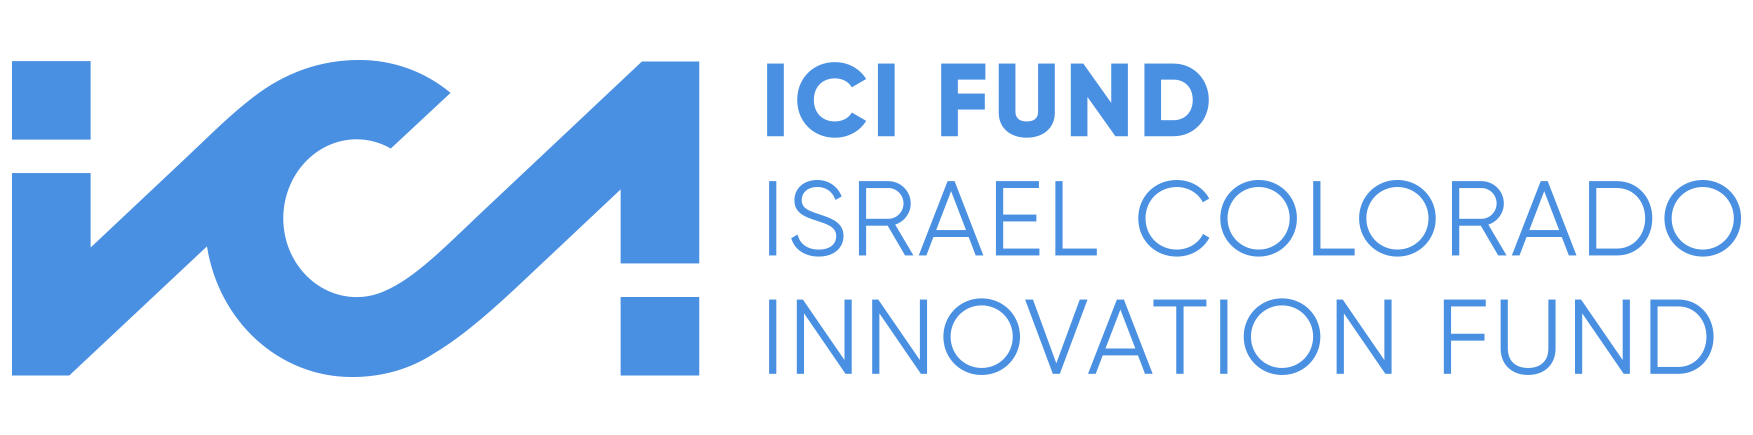 The Israel – Colorado Innovation Fund is a seed-stage venture capital fund that leads investment rounds in ambitious Israeli entrepreneurs and supports them in accessing markets in the United States. The Fund leverages the expertise of Innosphere, Colorado’s leading technology incubator.  The Fund was formed to commercialize cutting edge technologies from Israel in Colorado creating high quality jobs. https://www.ici.fund 